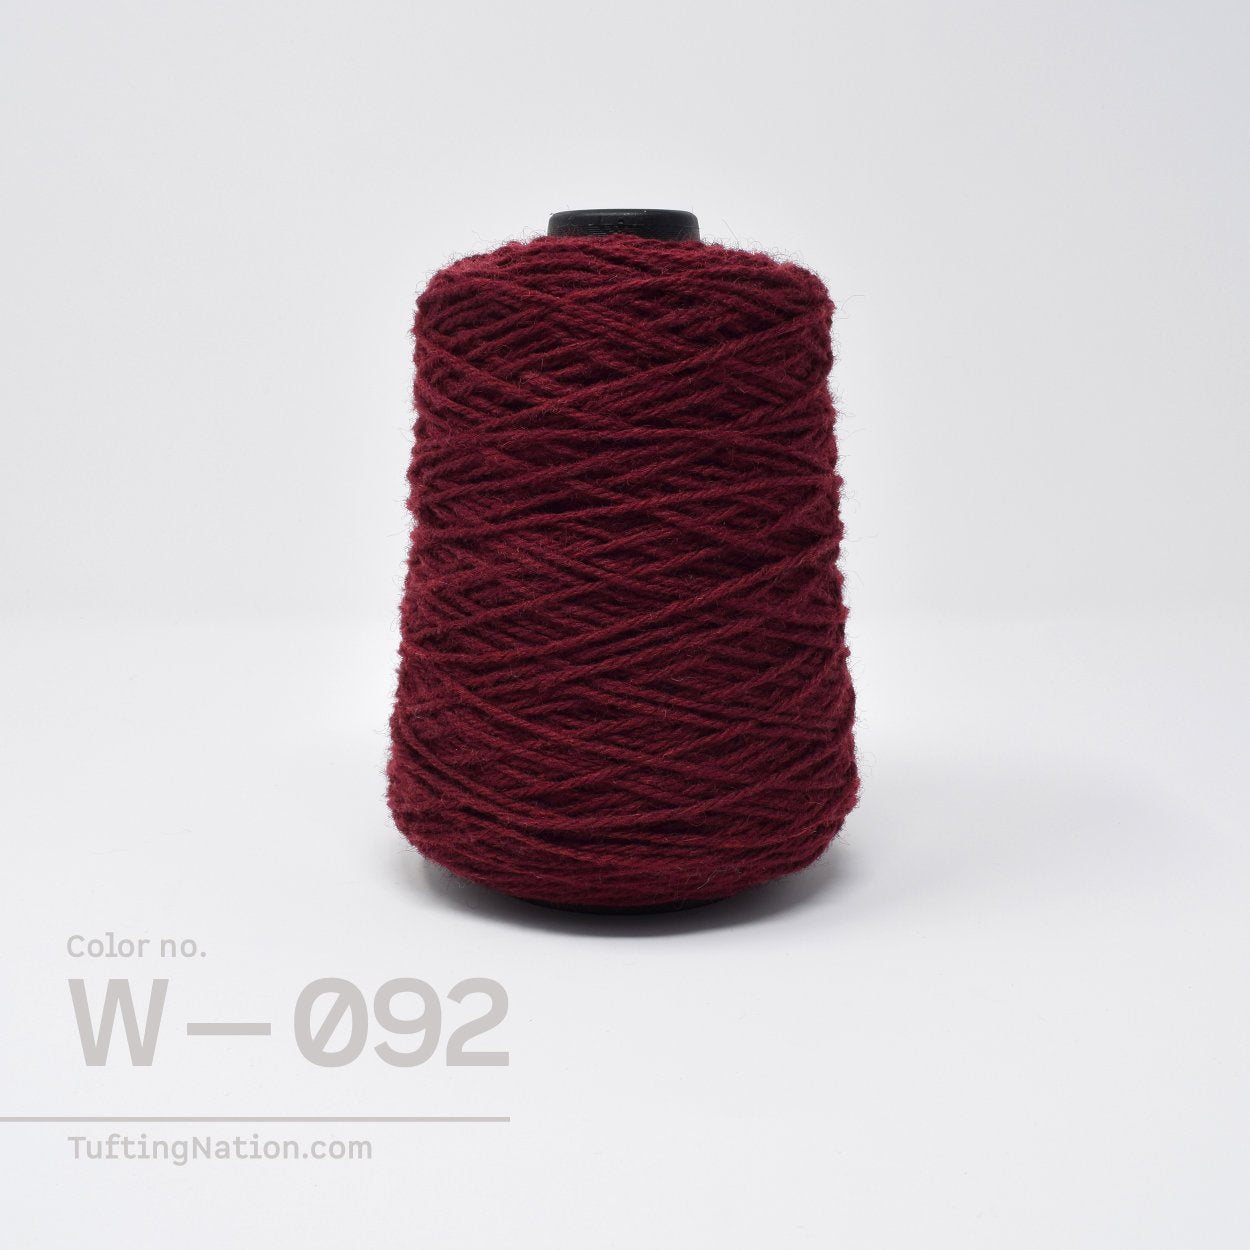 Cherry Red Rug Wool Yarn on cones for Rug Tufting, Weaving and Punch Needle | TuftingNation